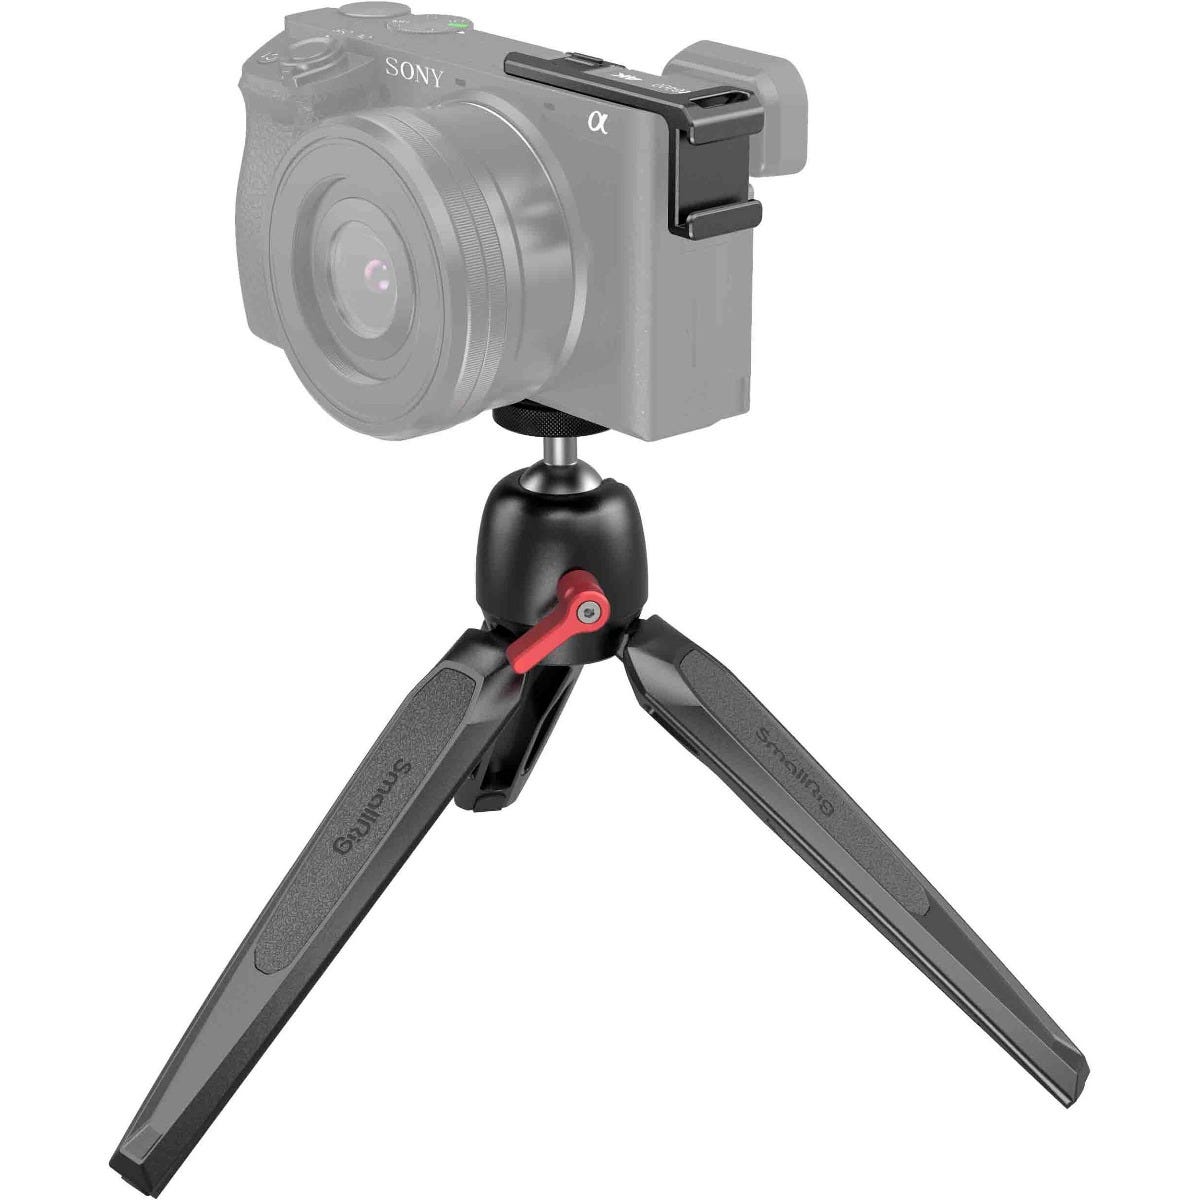 Image of SmallRig Cold Shoe Mount & Tripod Kit for Sony A6000/ A6100/A6300/A6400/A6500 - 3150